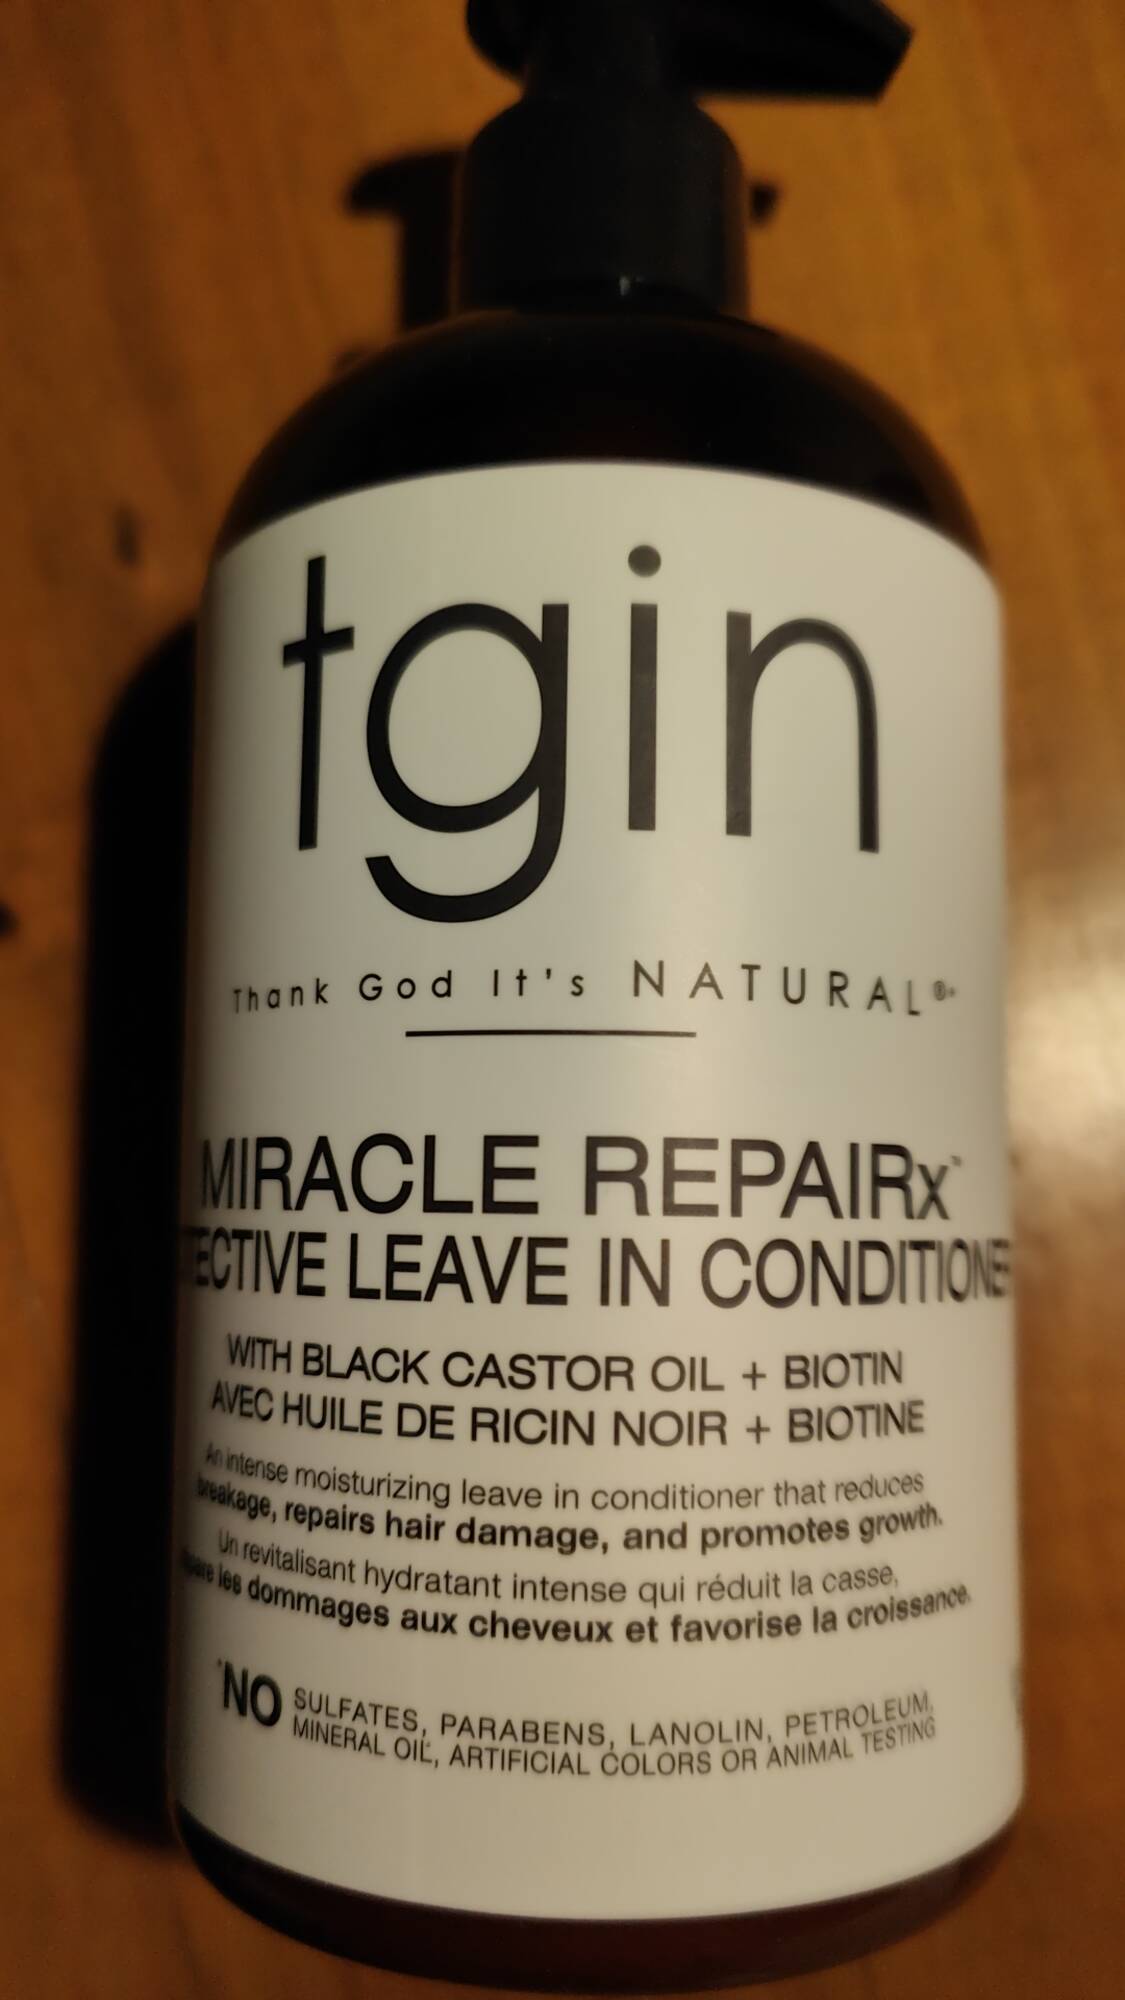 TGIN - Miracle repairx - Protective leave in conditioner